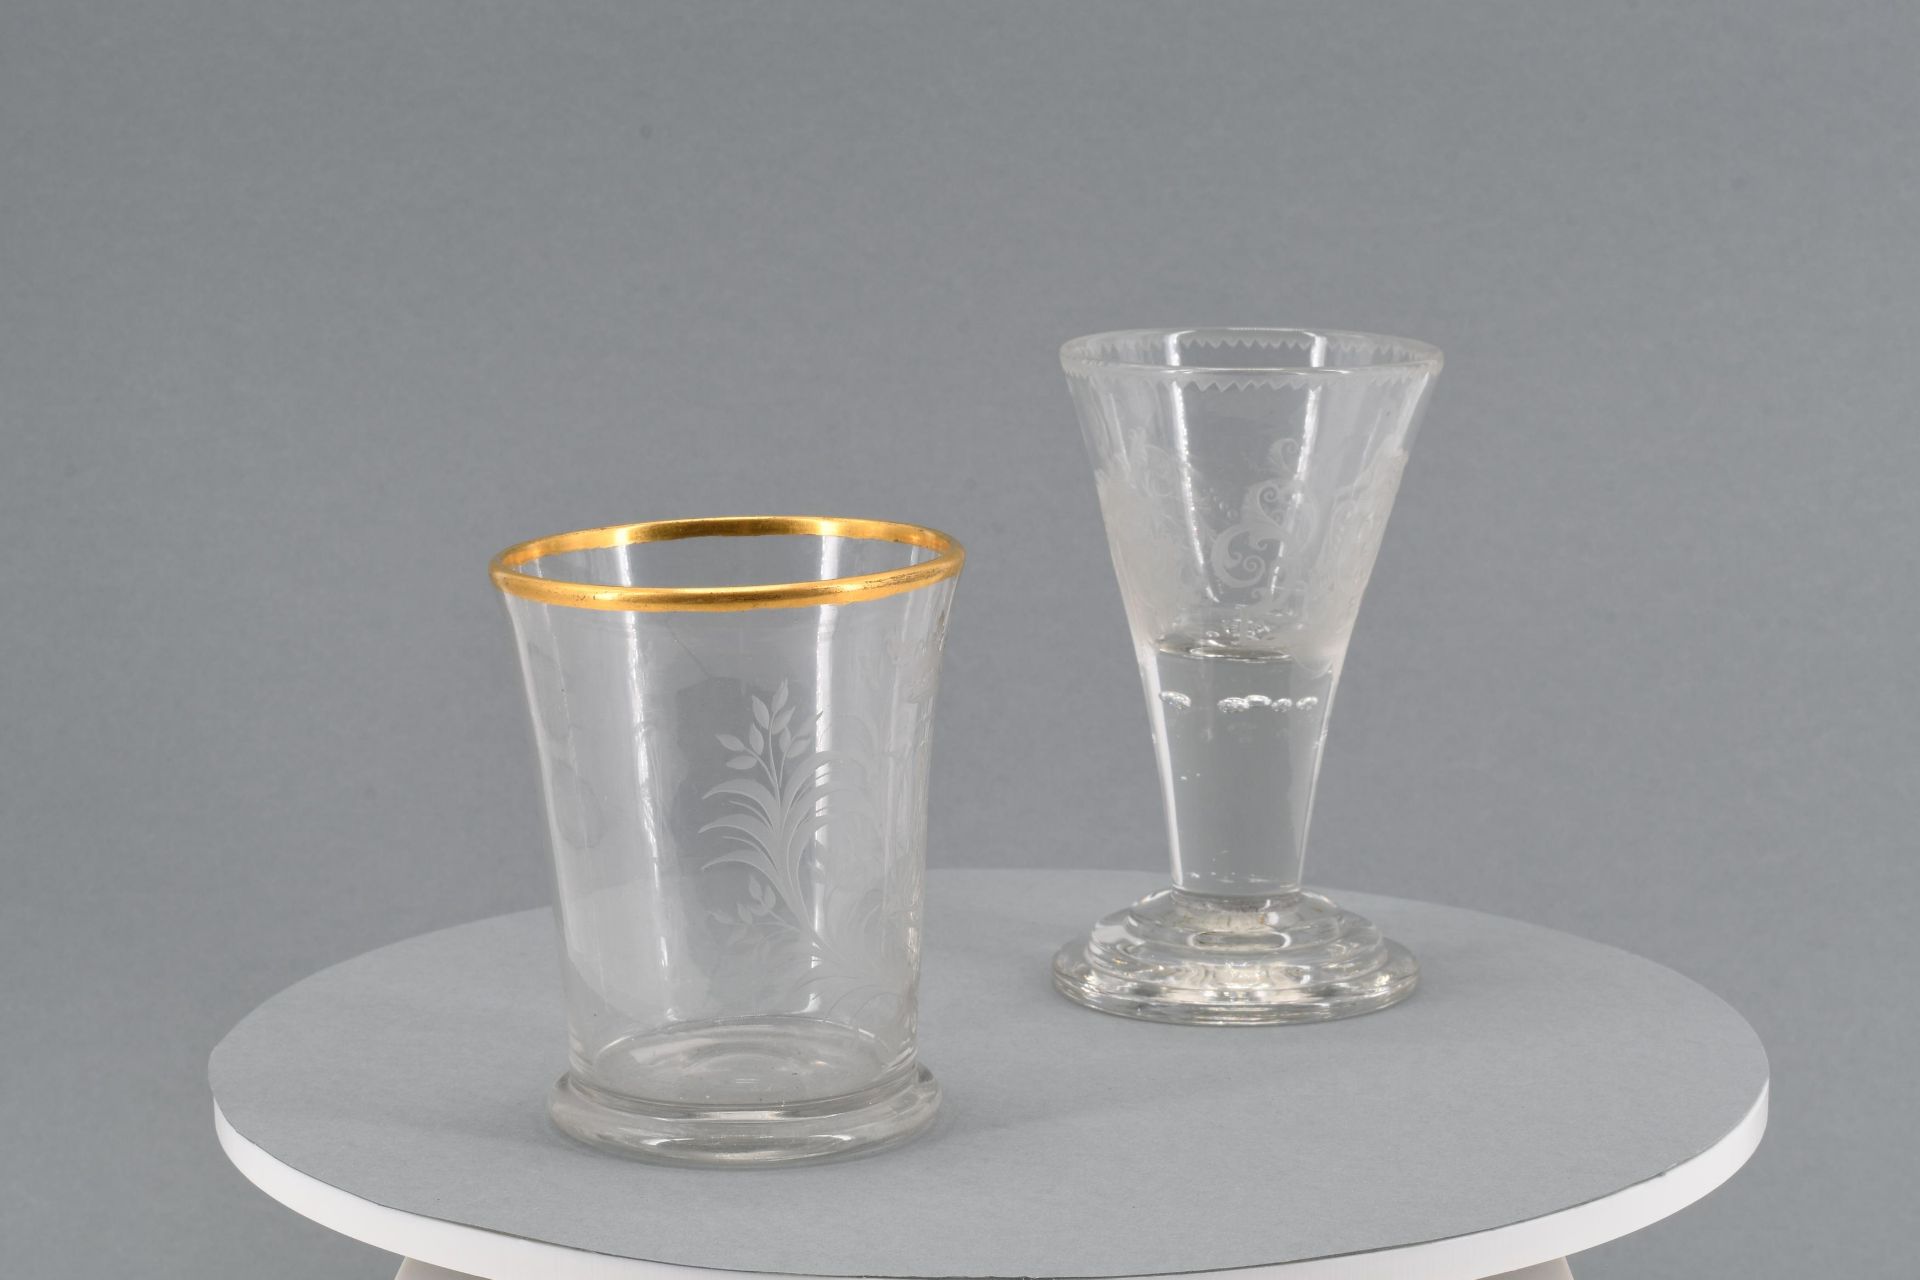 Goblet and engraved cup with golden rim - Image 4 of 6